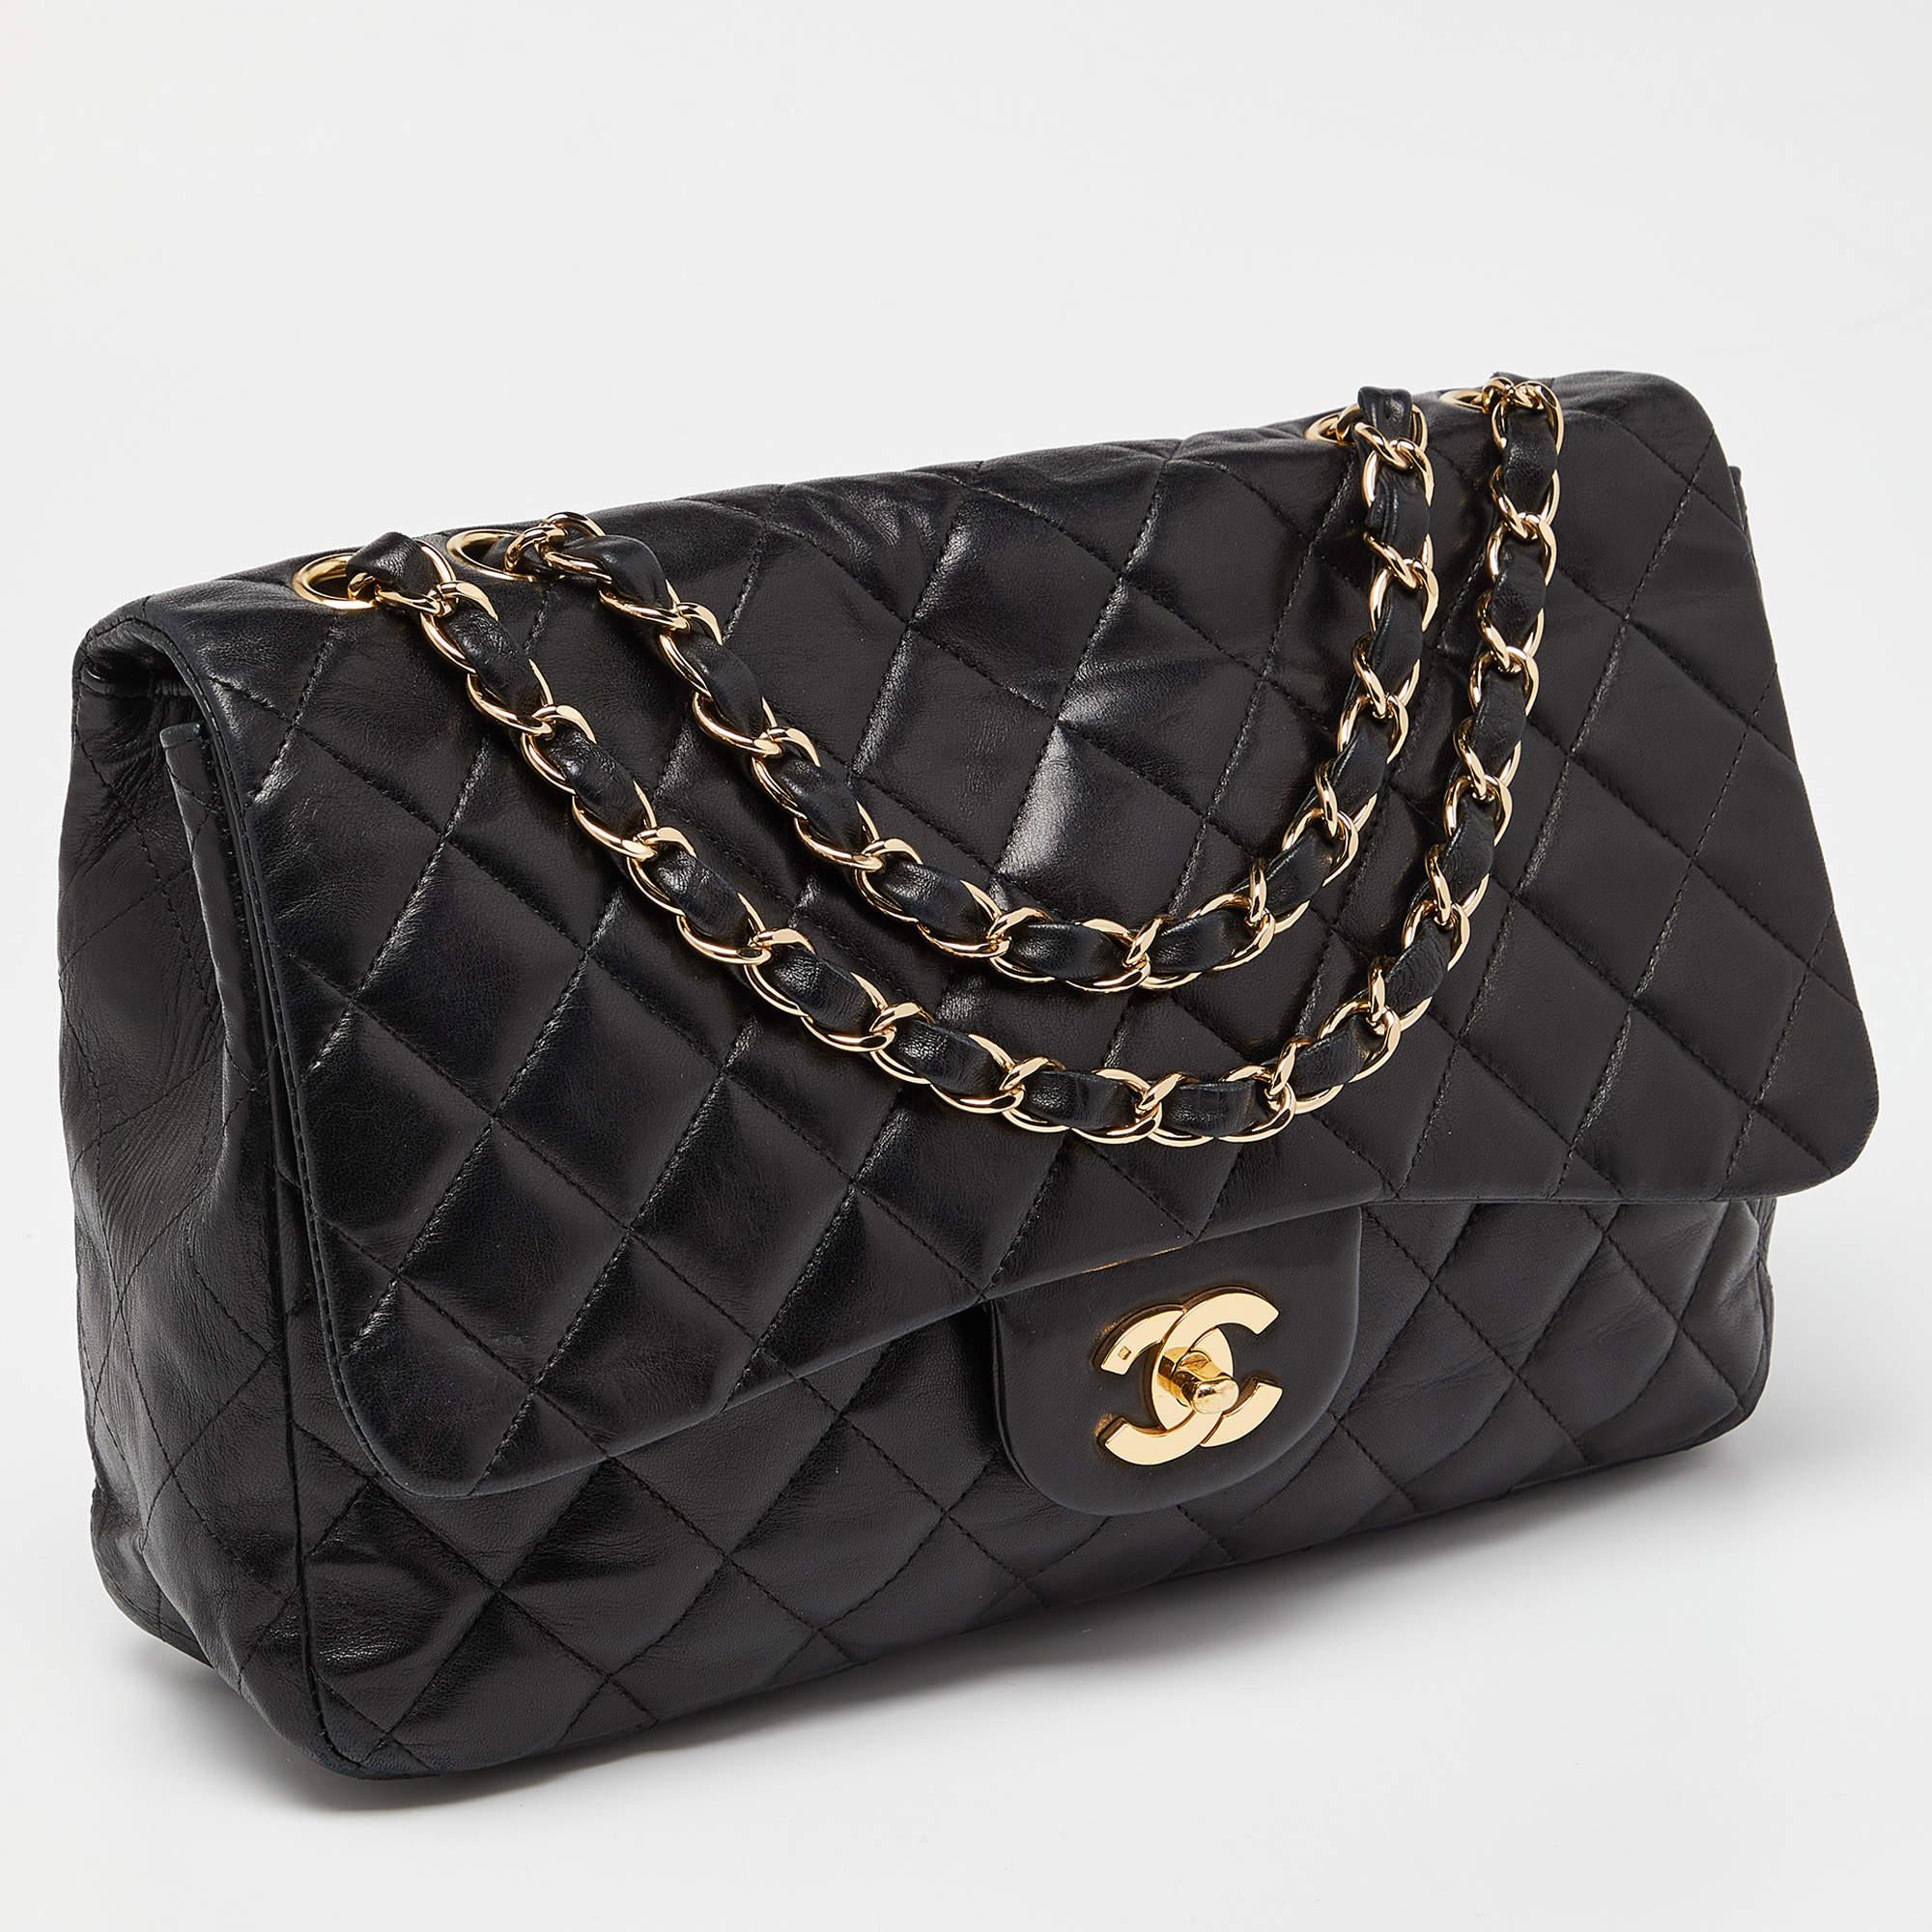 Women's Chanel Black Quilted Leather Jumbo Classic Single Flap Bag For Sale